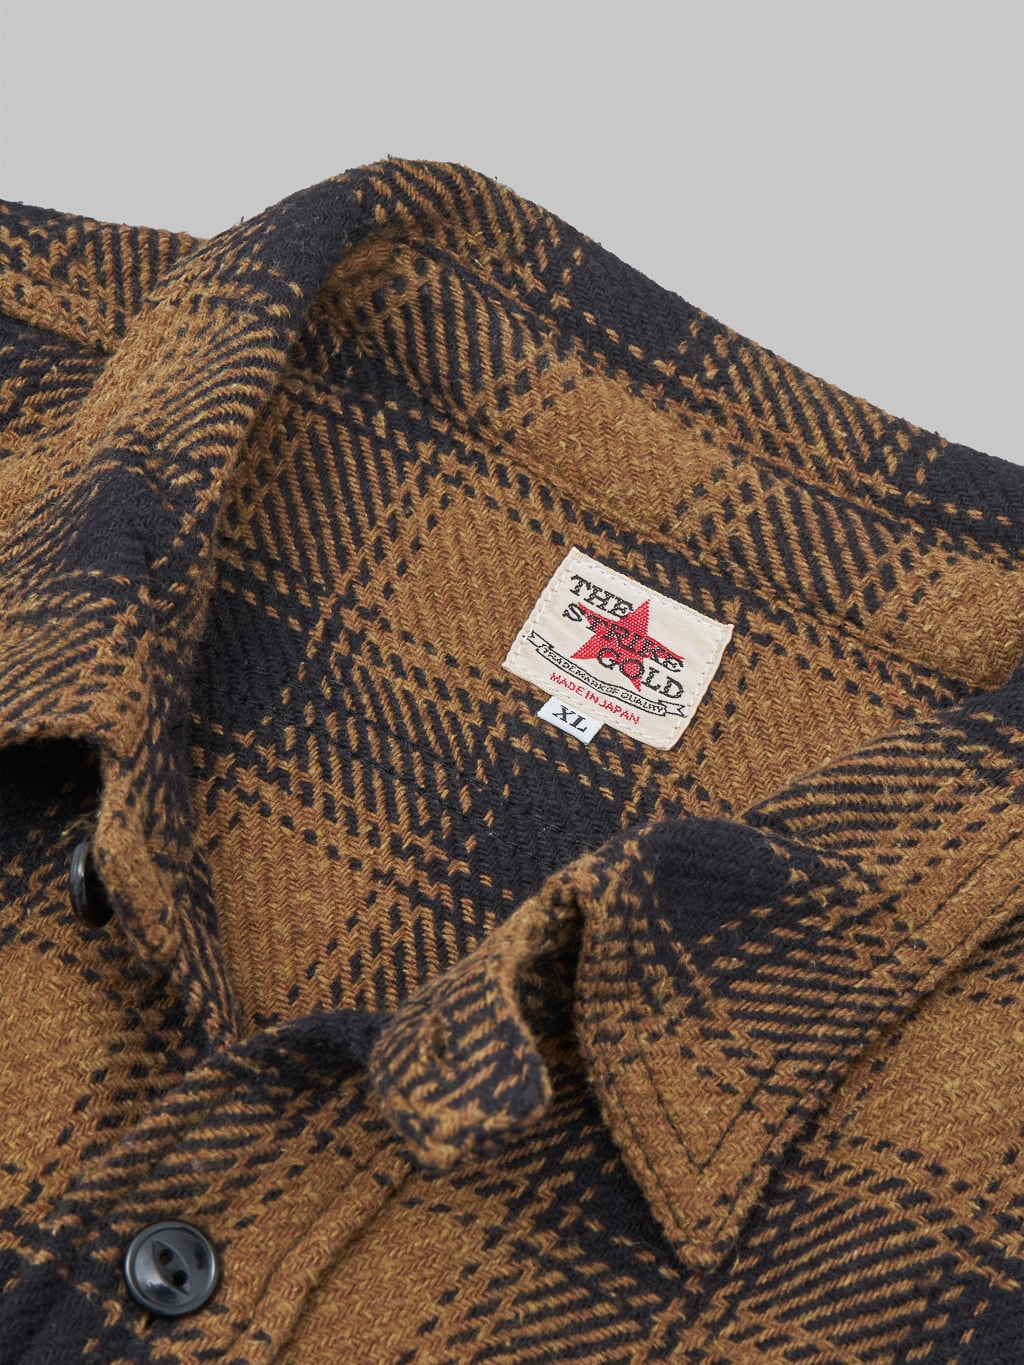 The Strike Gold SGS2203 Recycled Cotton Flannel Mixed Nep Check Work Shirt Brown